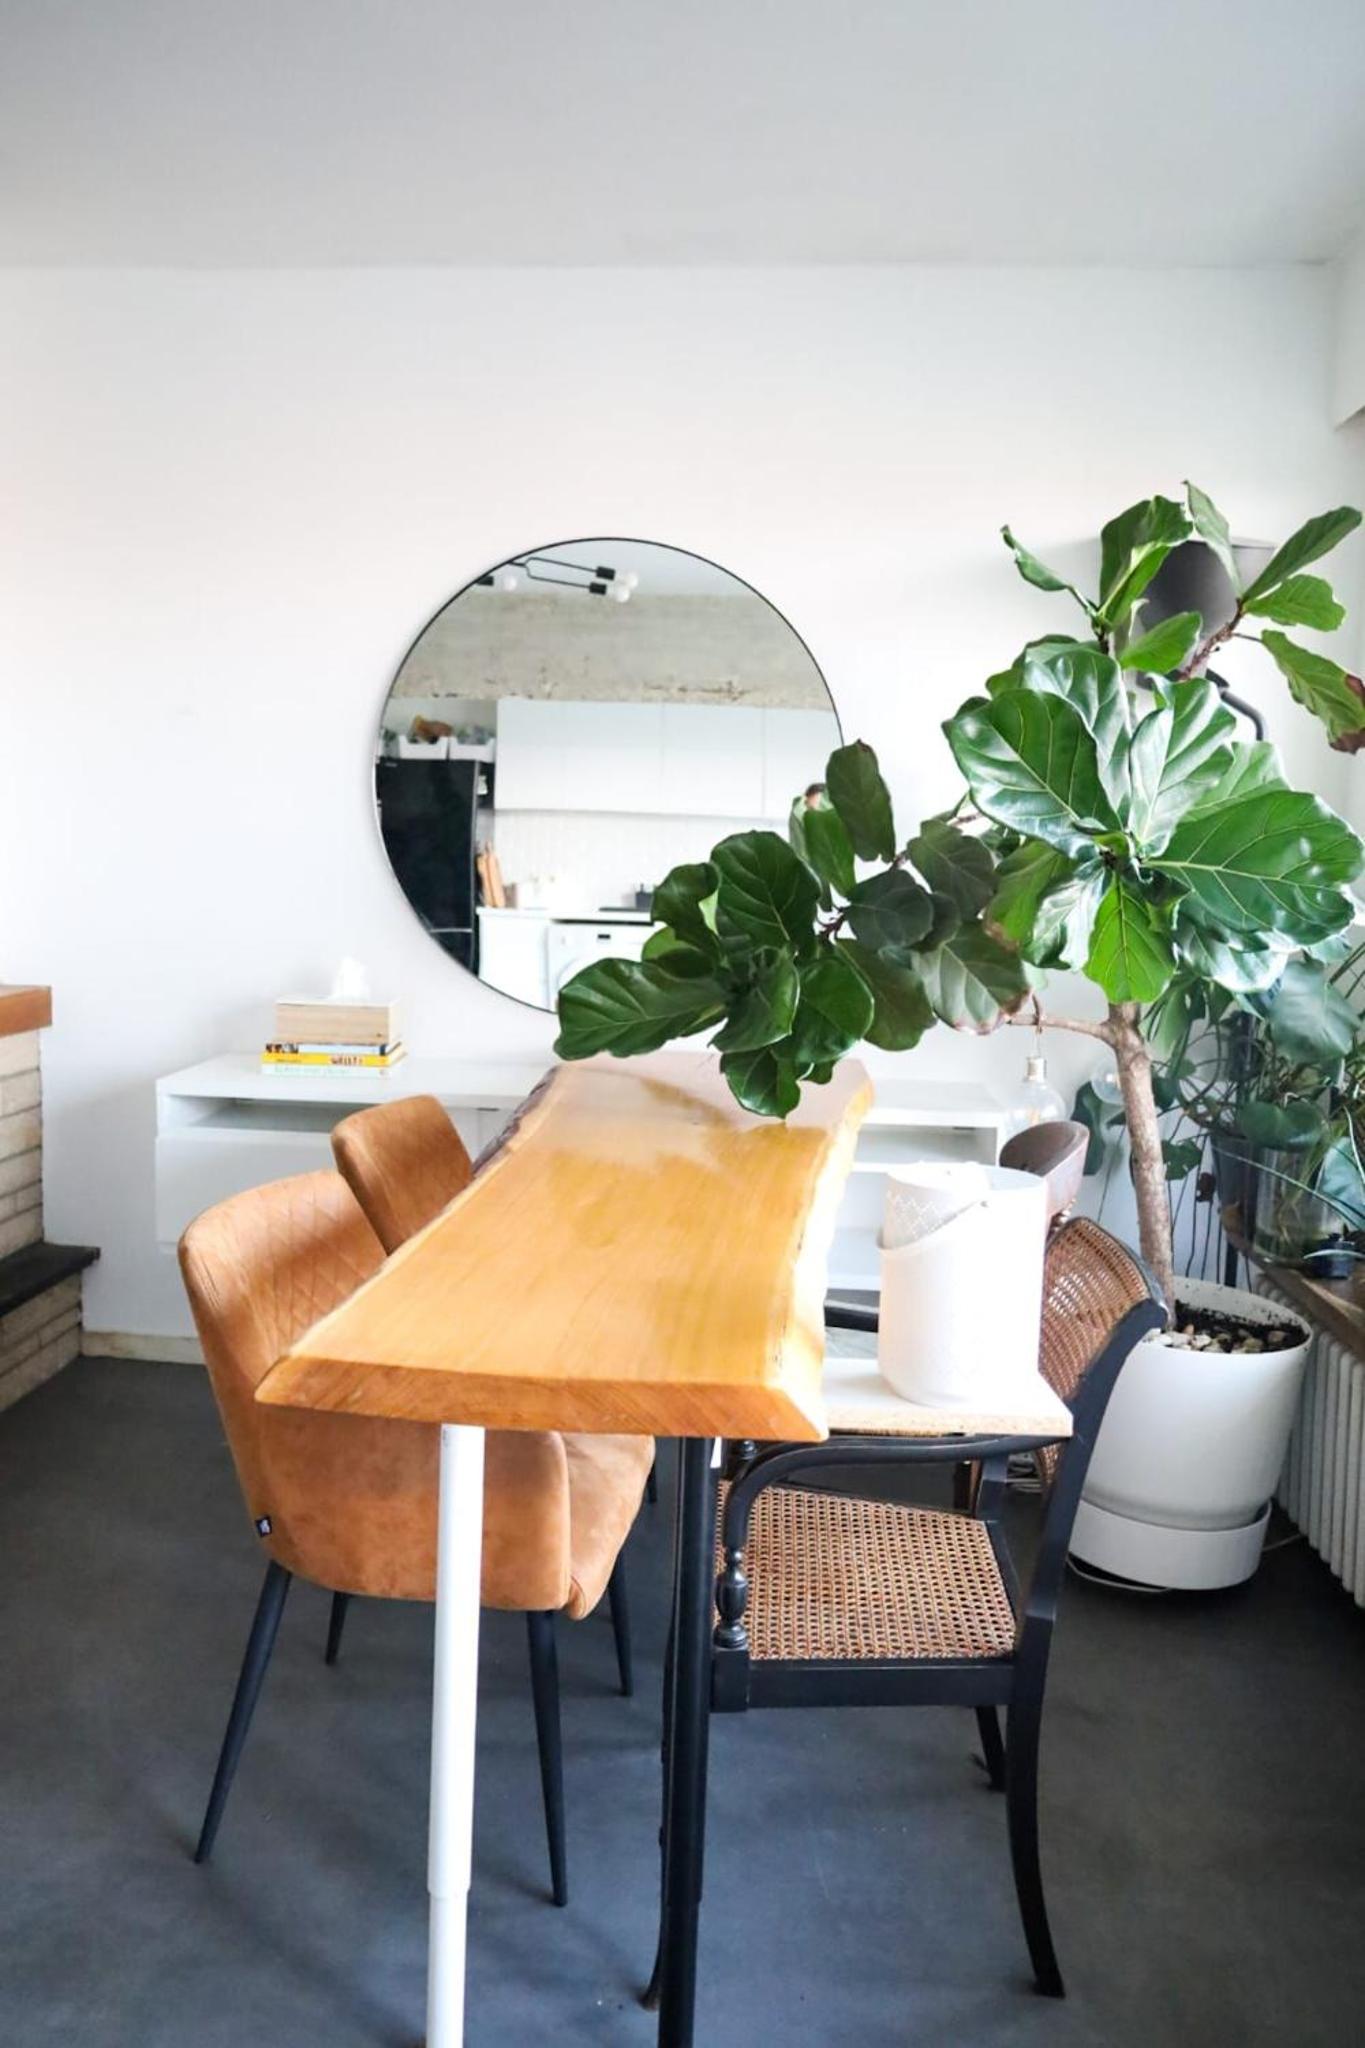 Furnished - Bright, Modern apartment in Brussels, 15 minutes walk from the Atomium